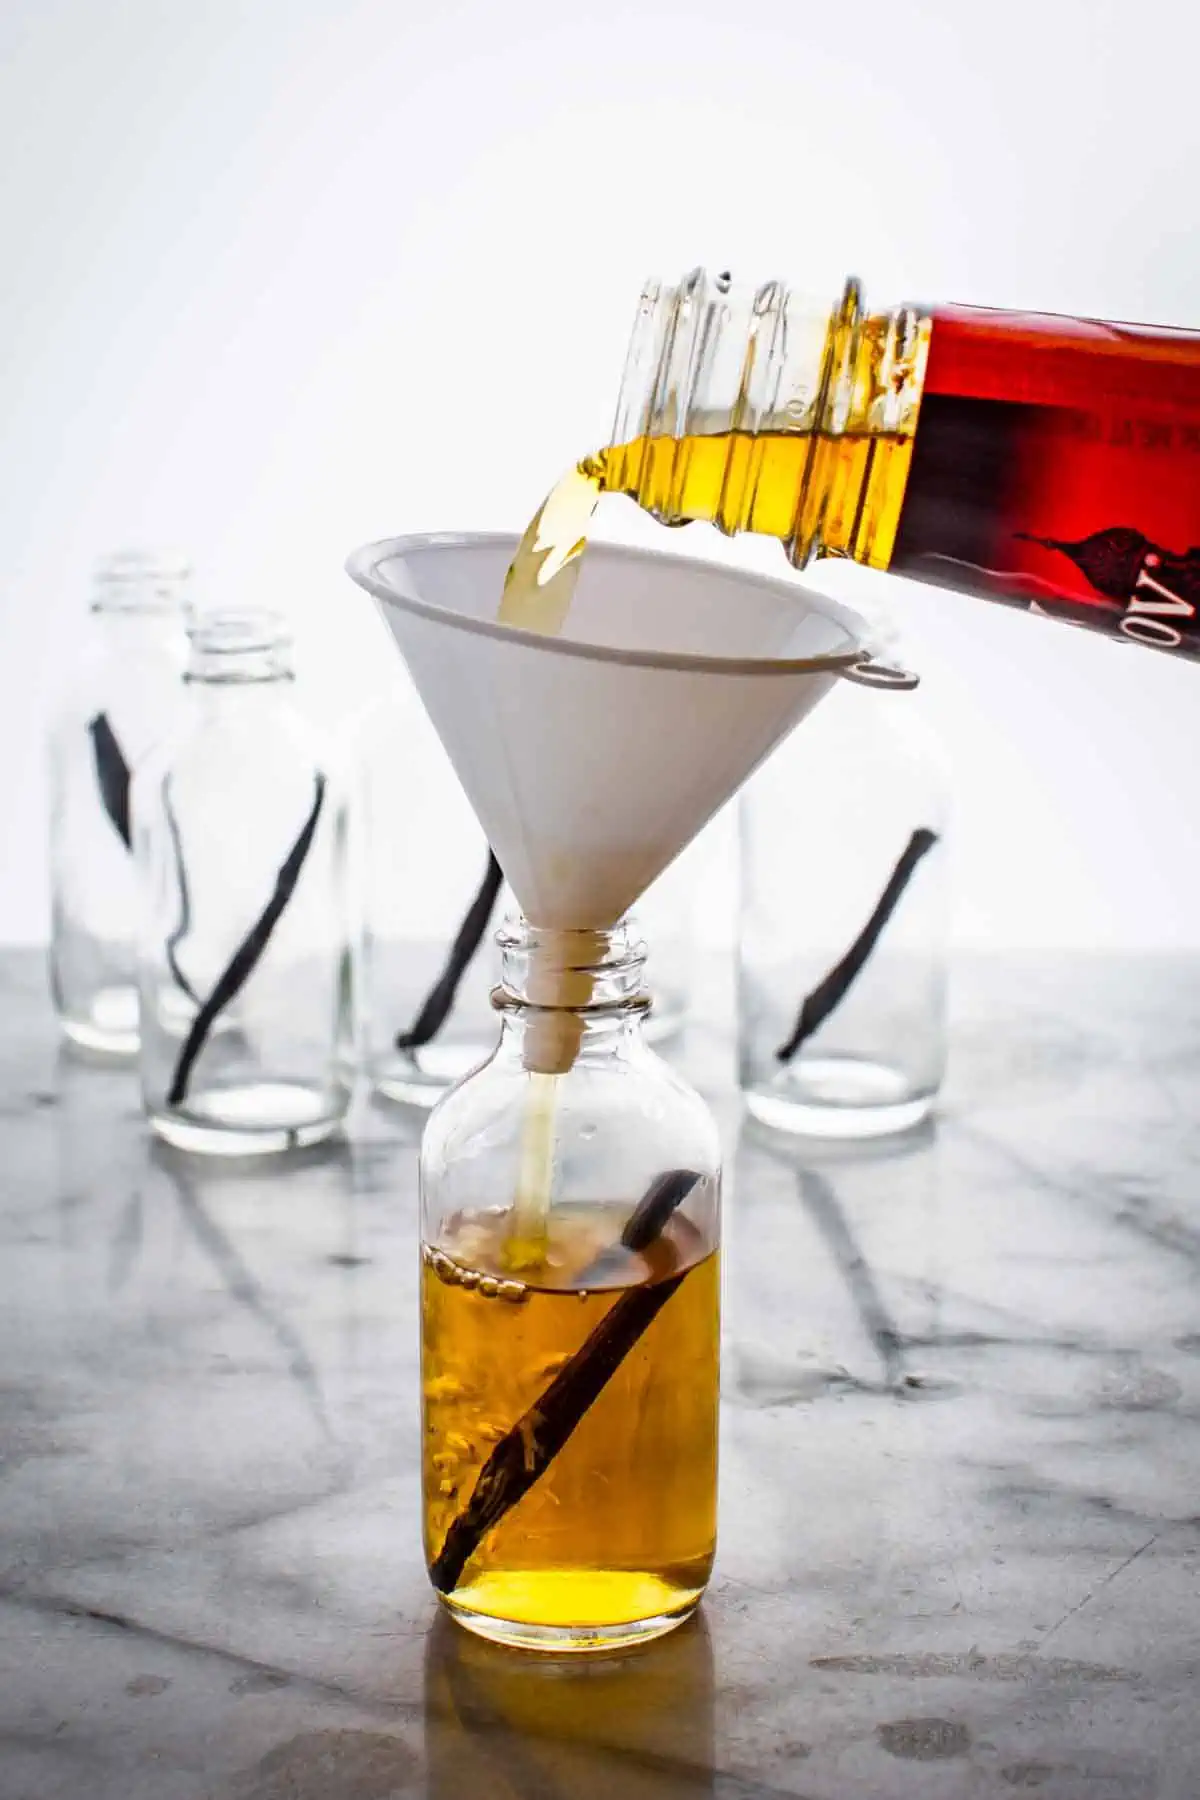 Pouring homemade extract through a funnel into a smaller glass bottle.